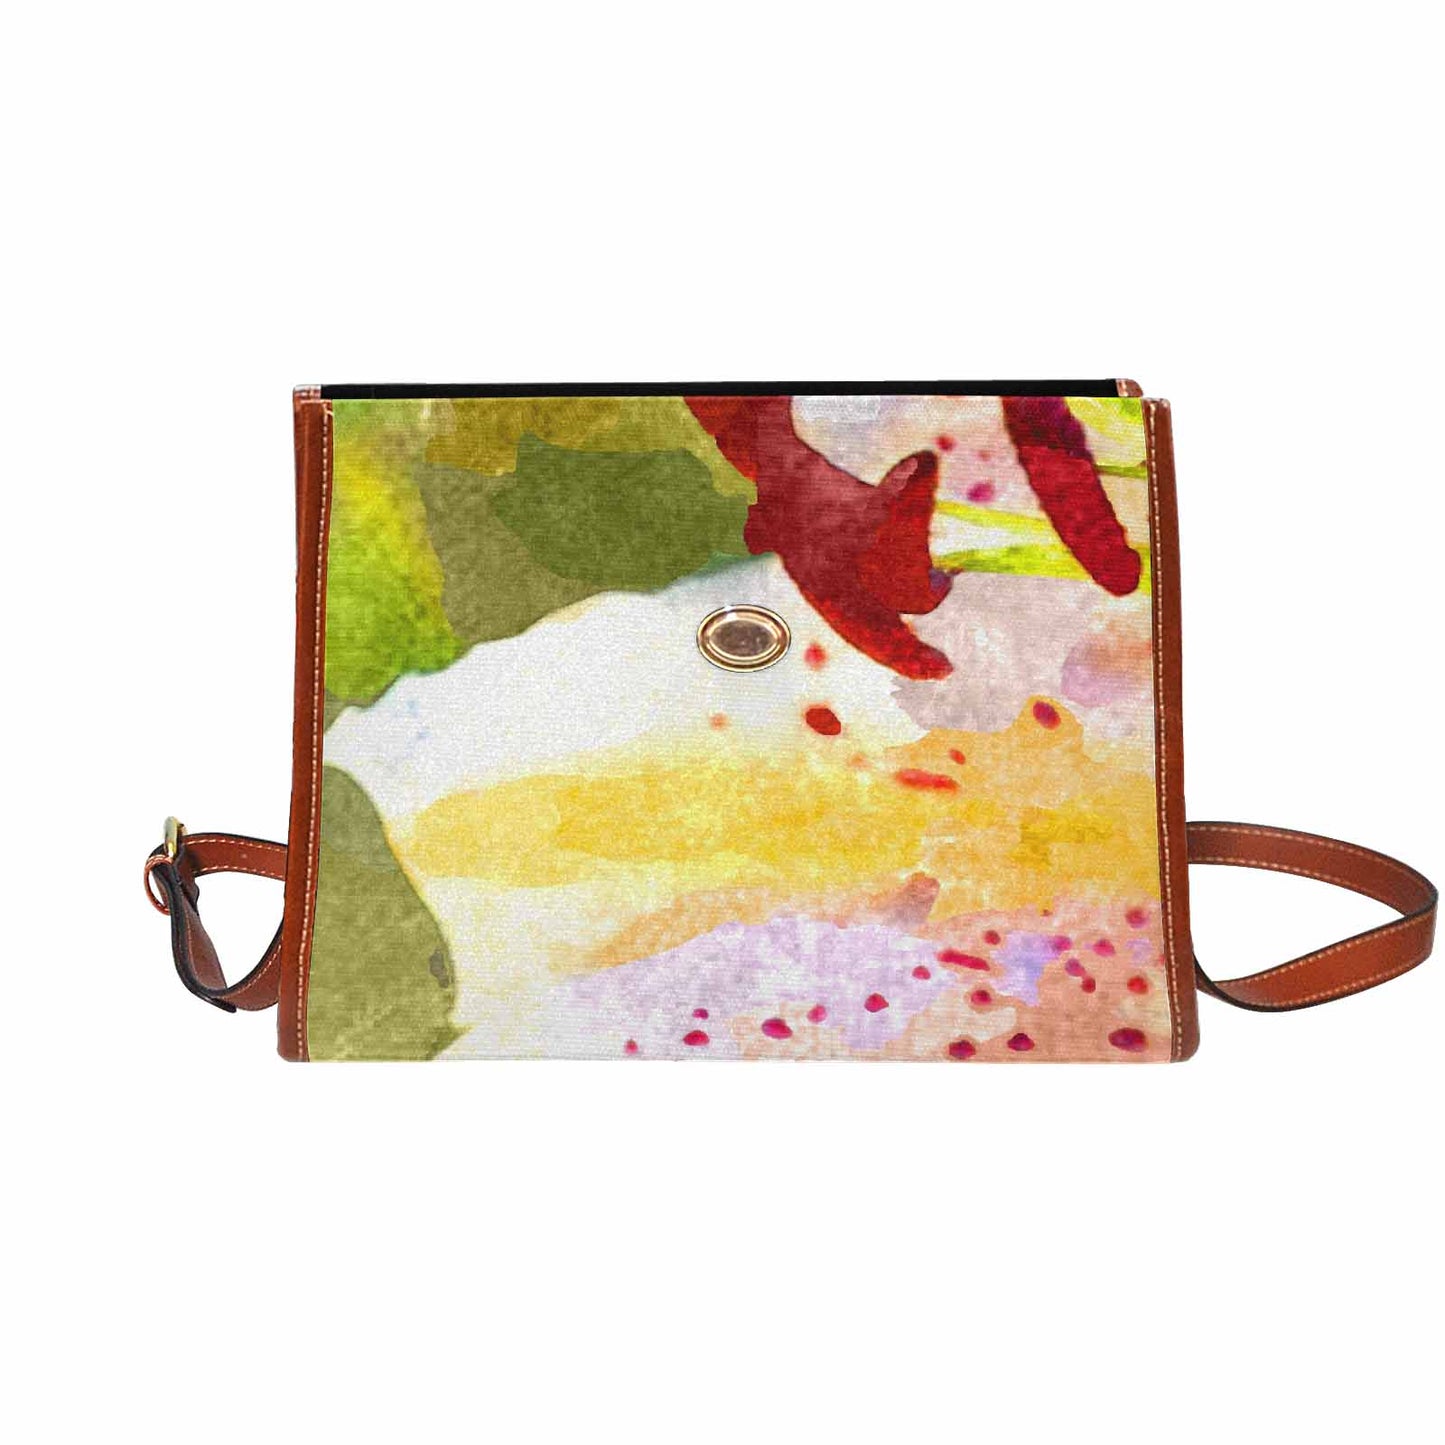 Water Color Florals, All Over Print Waterproof Canvas Bag, Mod 1695341 Design 088, BROWN STRAP